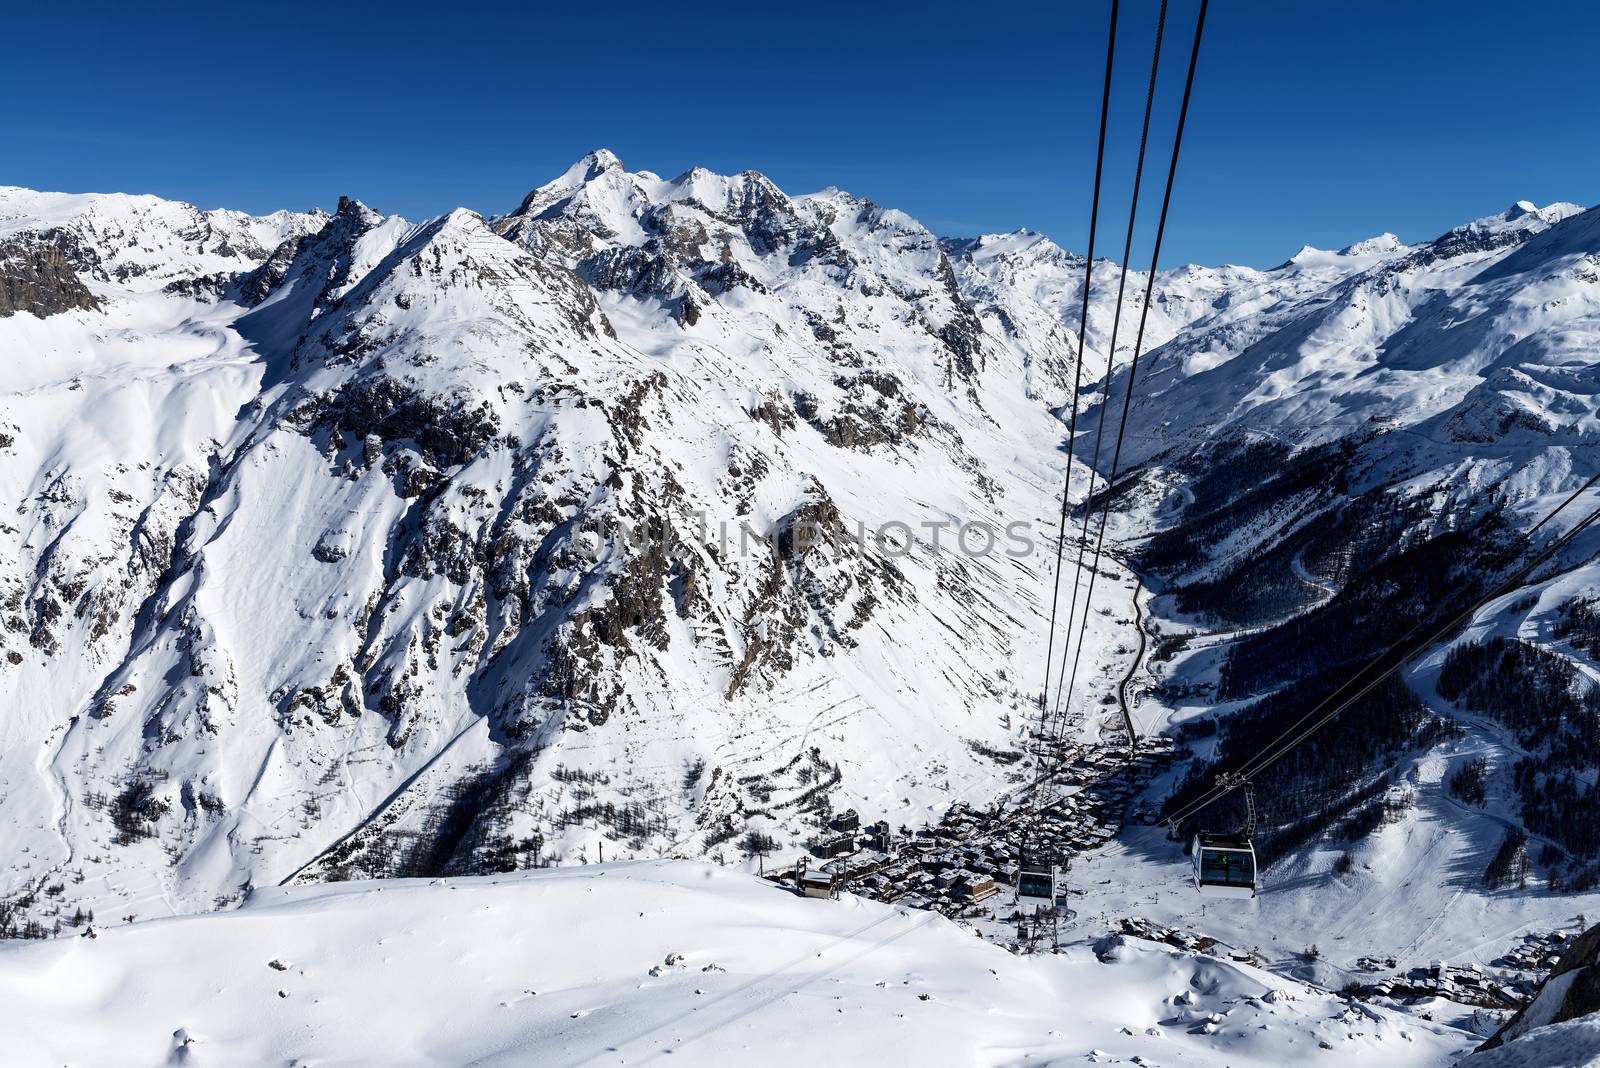 Cablecar to Val d'Isere, by ventdusud